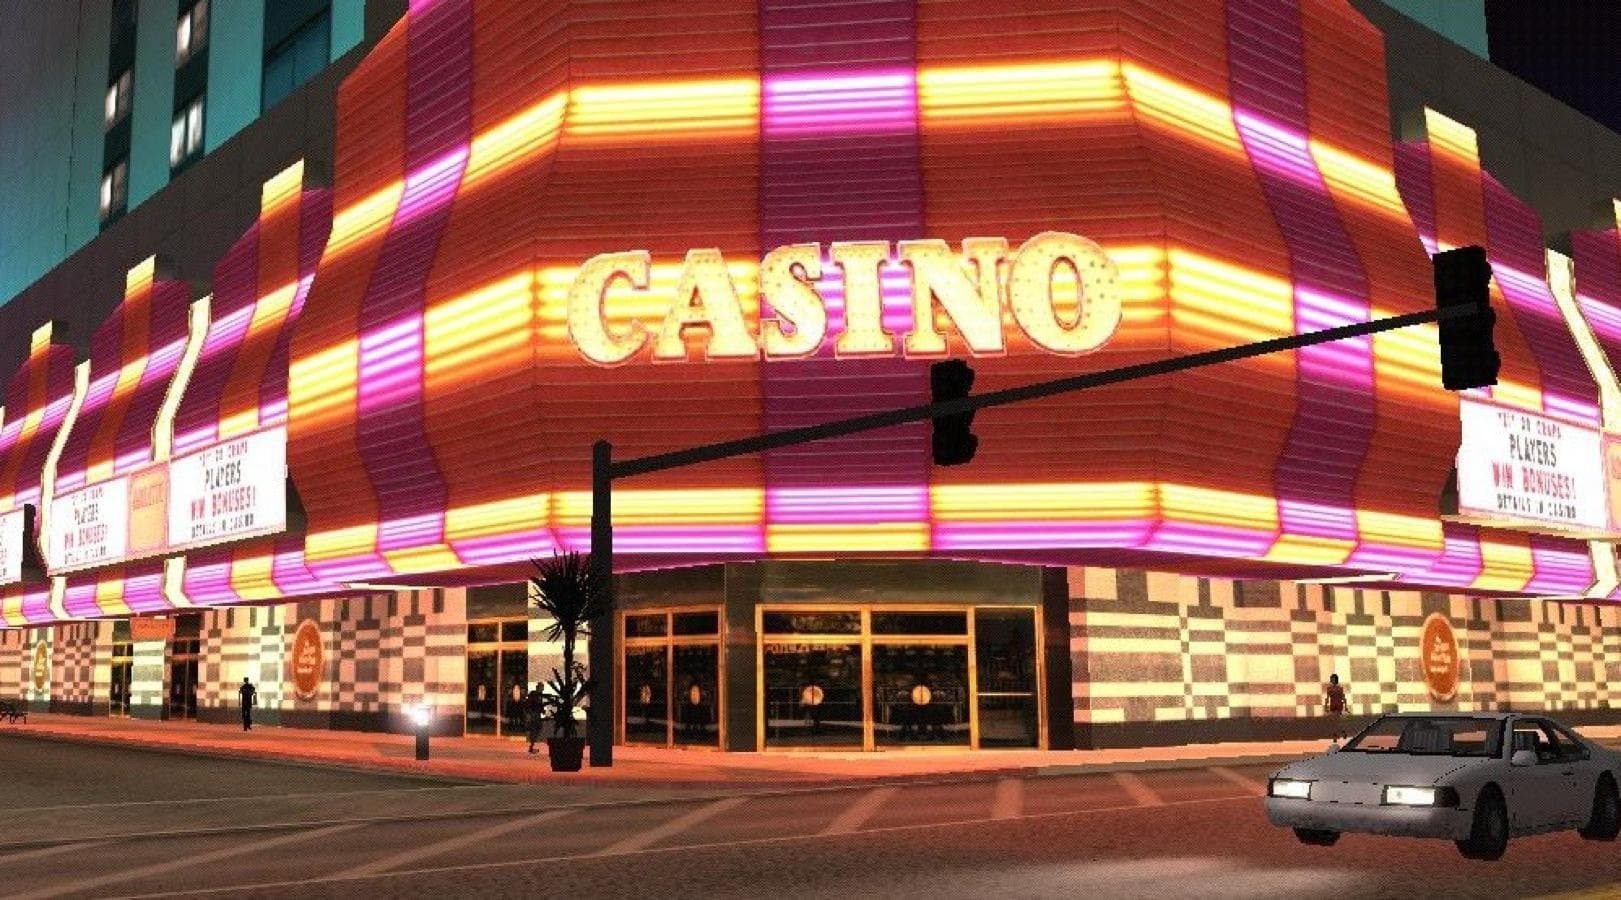 Building Relationships With casino